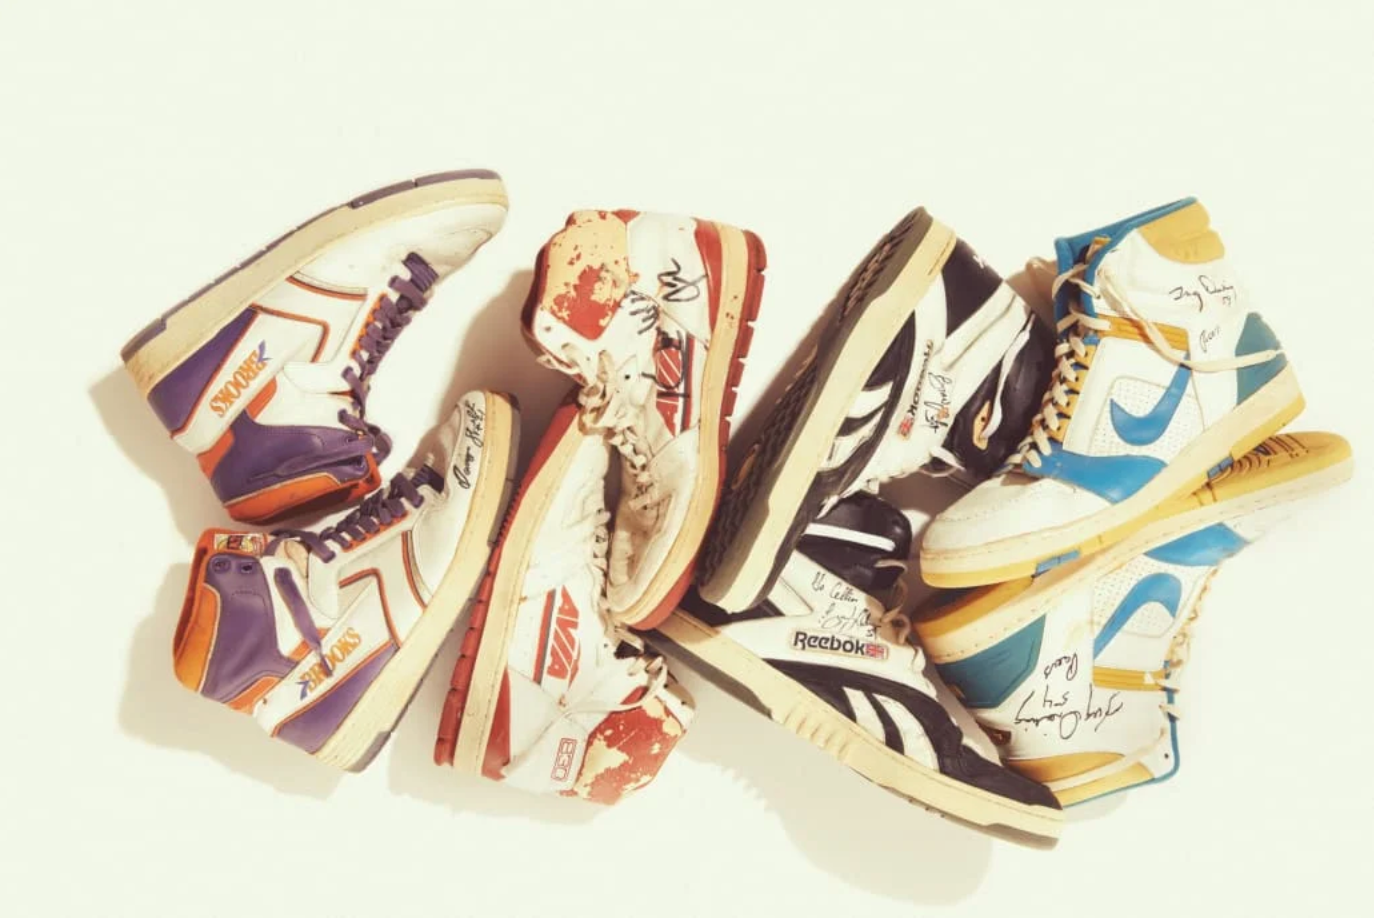 How Sneaker Culture Conquered the World